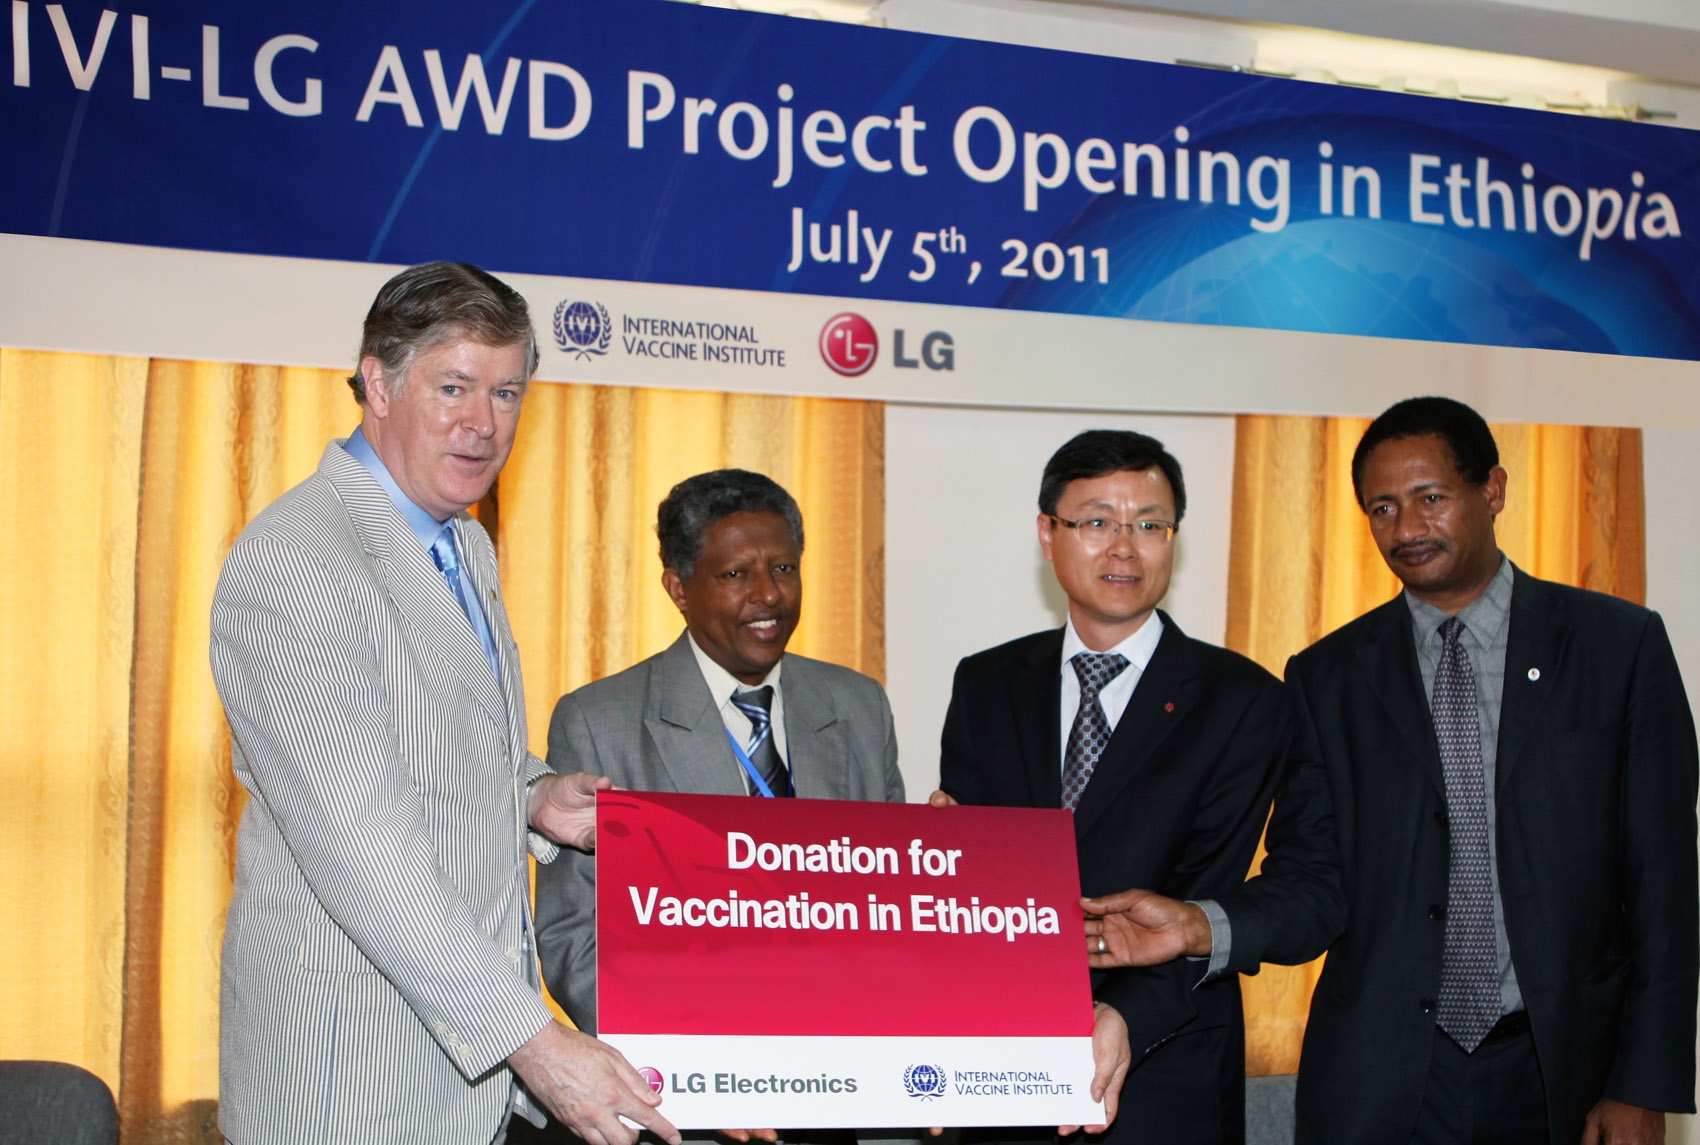 Anthony Flynn, deputy director-general of the International Vaccine Institute (IVI), Abraham Assefa, head of Armaer Hansen Research Institute (AHRI), Na Won-woo, president of LG Electronics Kenya, and Ahmed Emano Mustafa, director of the Ministry of Health of Ethiopia take a picture together to implement a mass vaccination program for children in Ethiopia